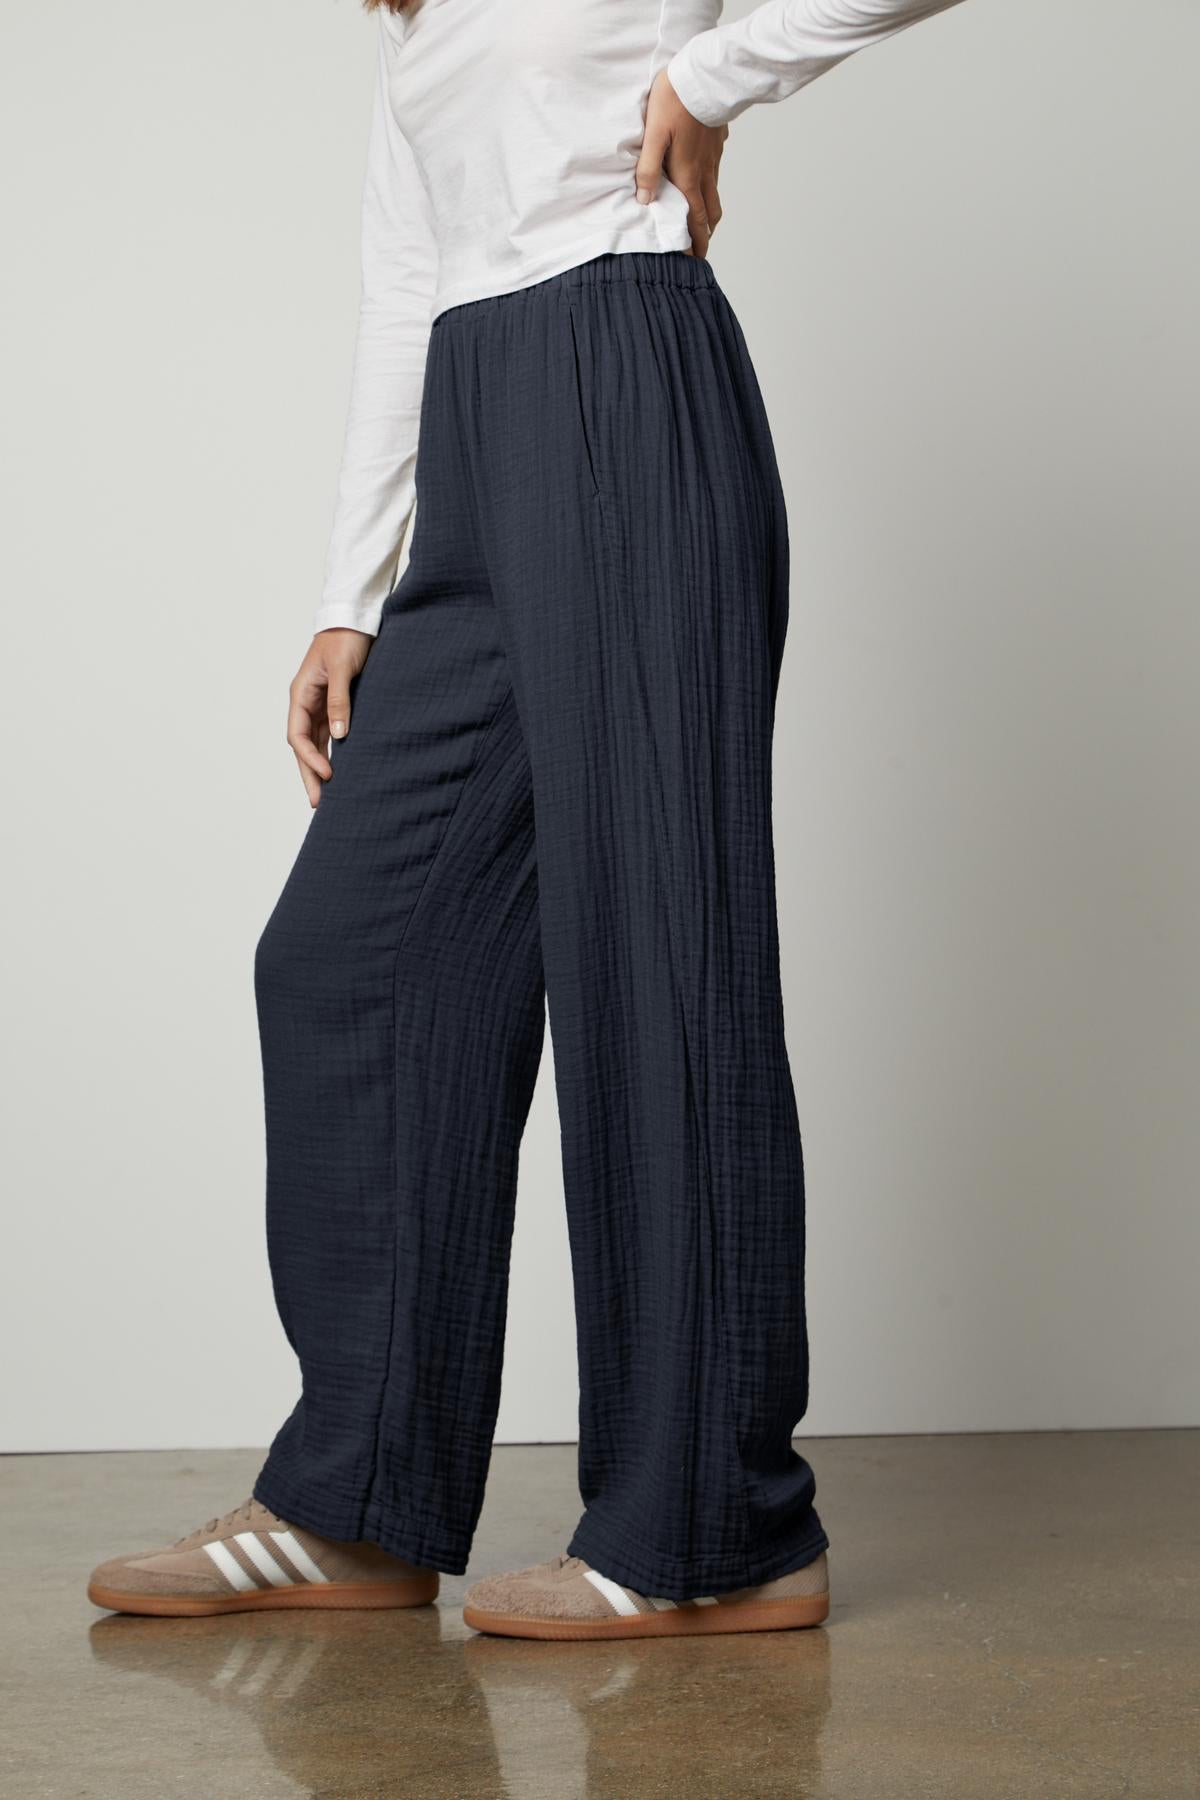 Woman wearing Velvet by Graham & Spencer navy blue straight leg pants and white top, paired with brown slide sandals.-36462885011649